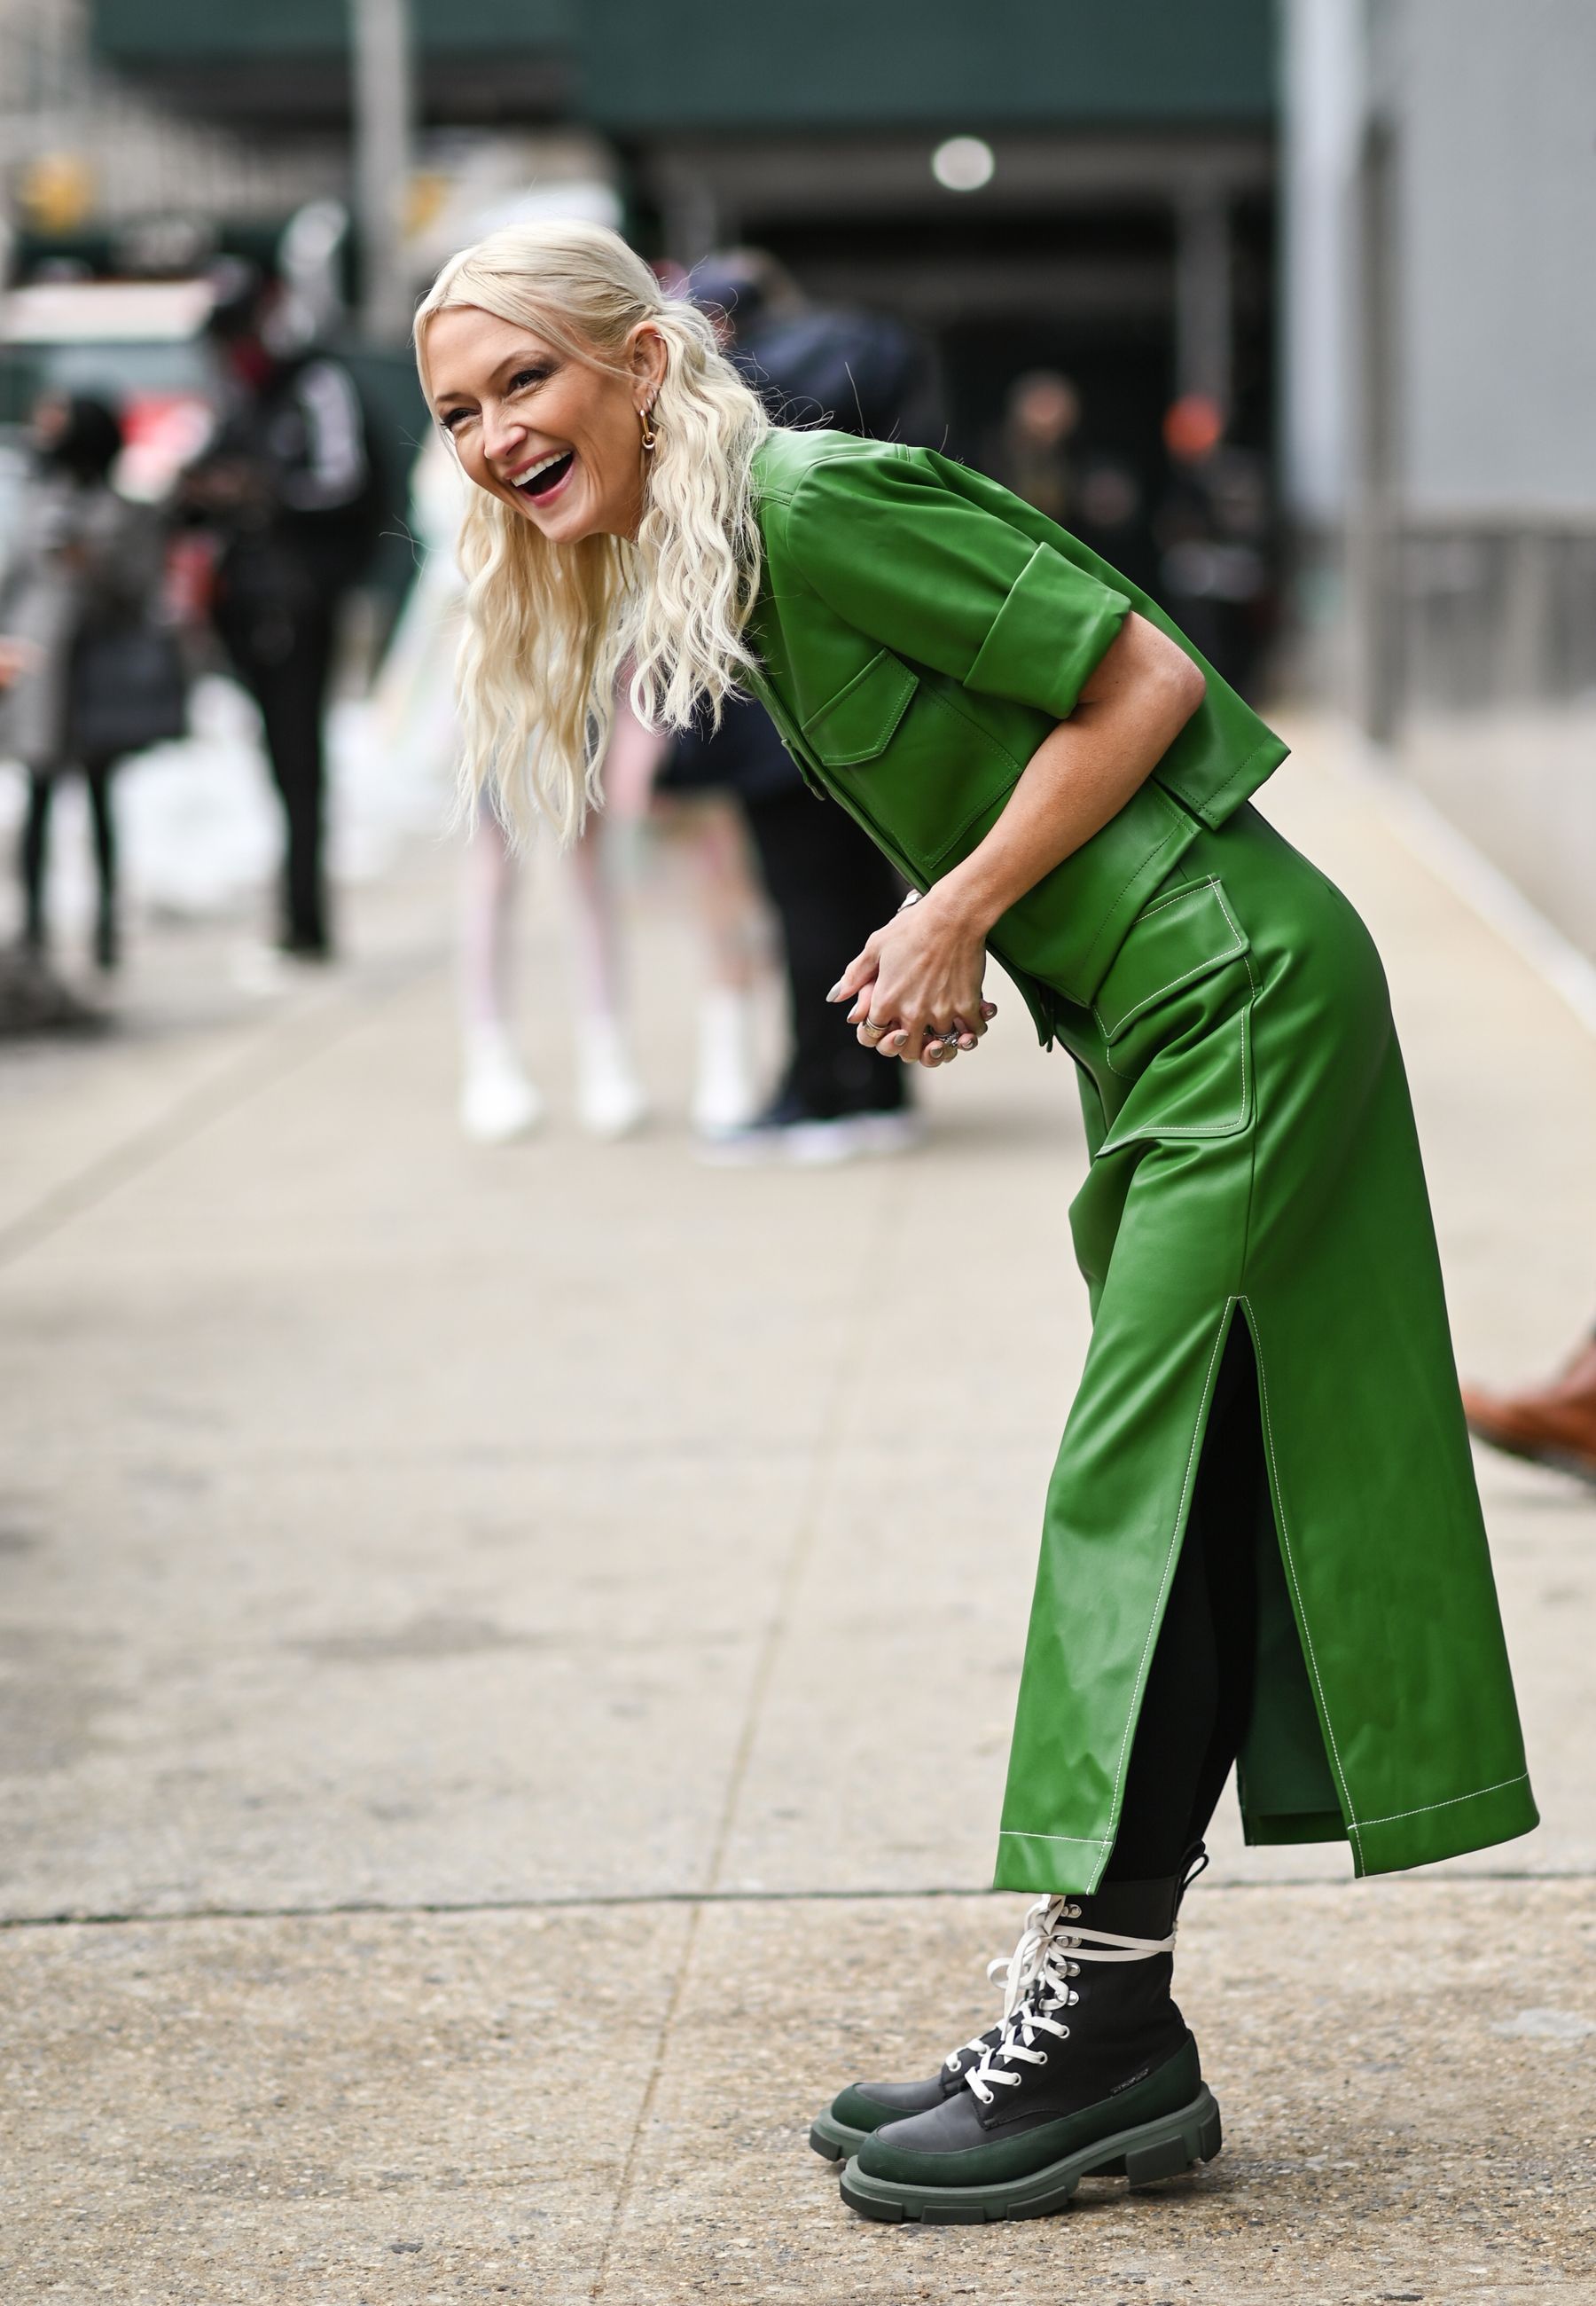 new york, new york   february 16 zanna roberts rassi is seen wearing a green top and skirt outside the rebecca minkoff show during new york fashion week fw21 at spring studios on february 16, 2021 in new york city photo by daniel zuchnikgetty images